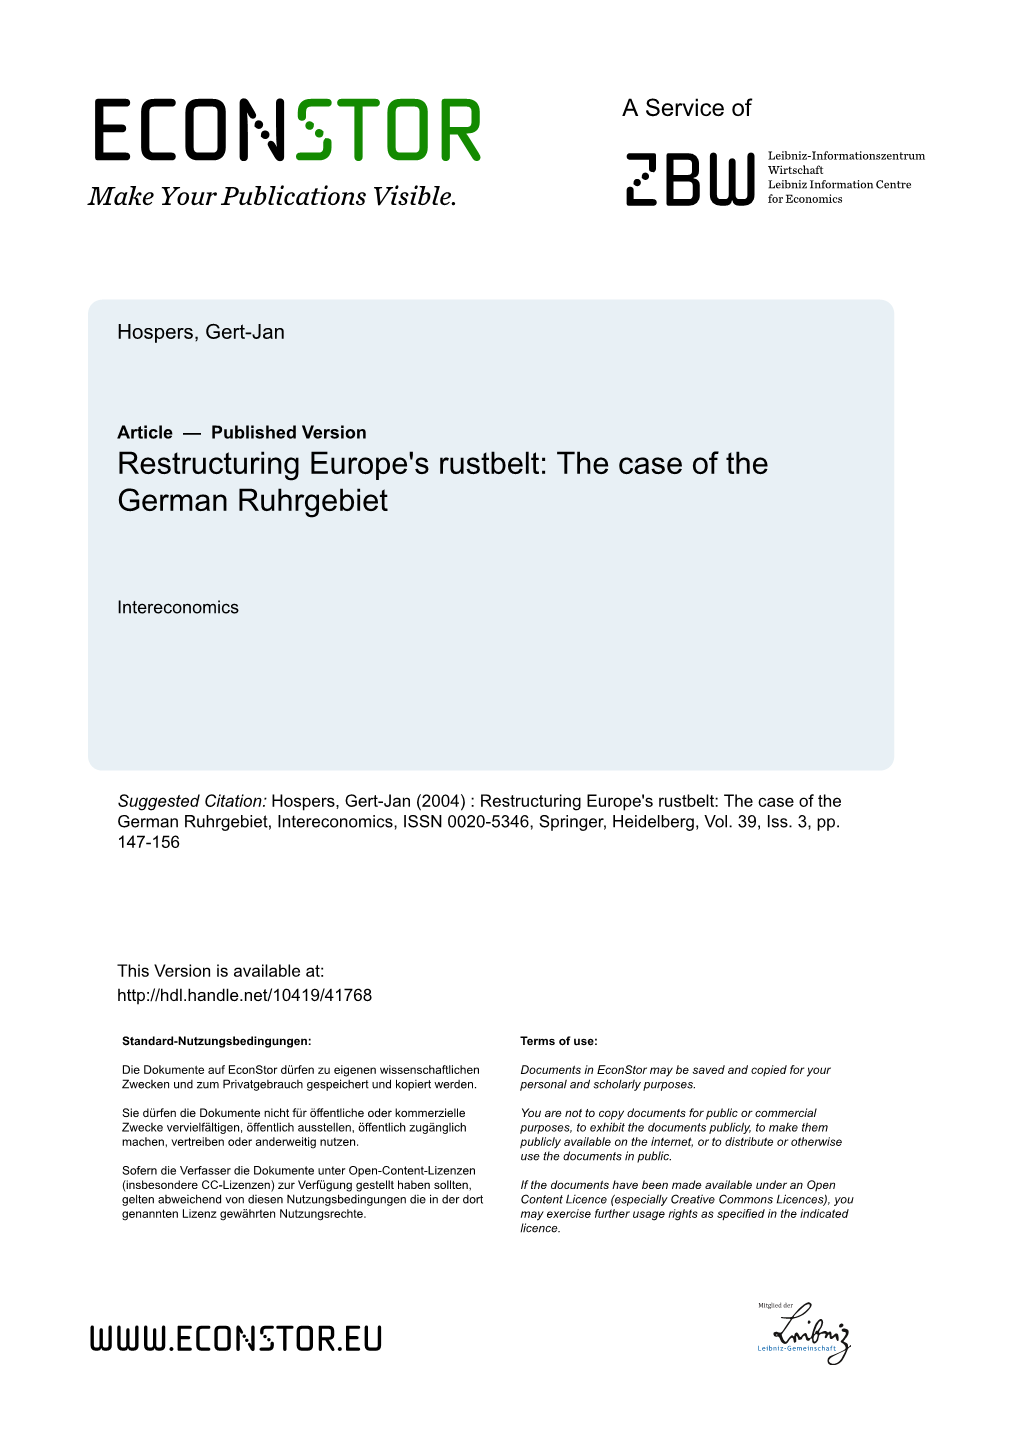 Restructuring Europe's Rustbelt: the Case of the German Ruhrgebiet